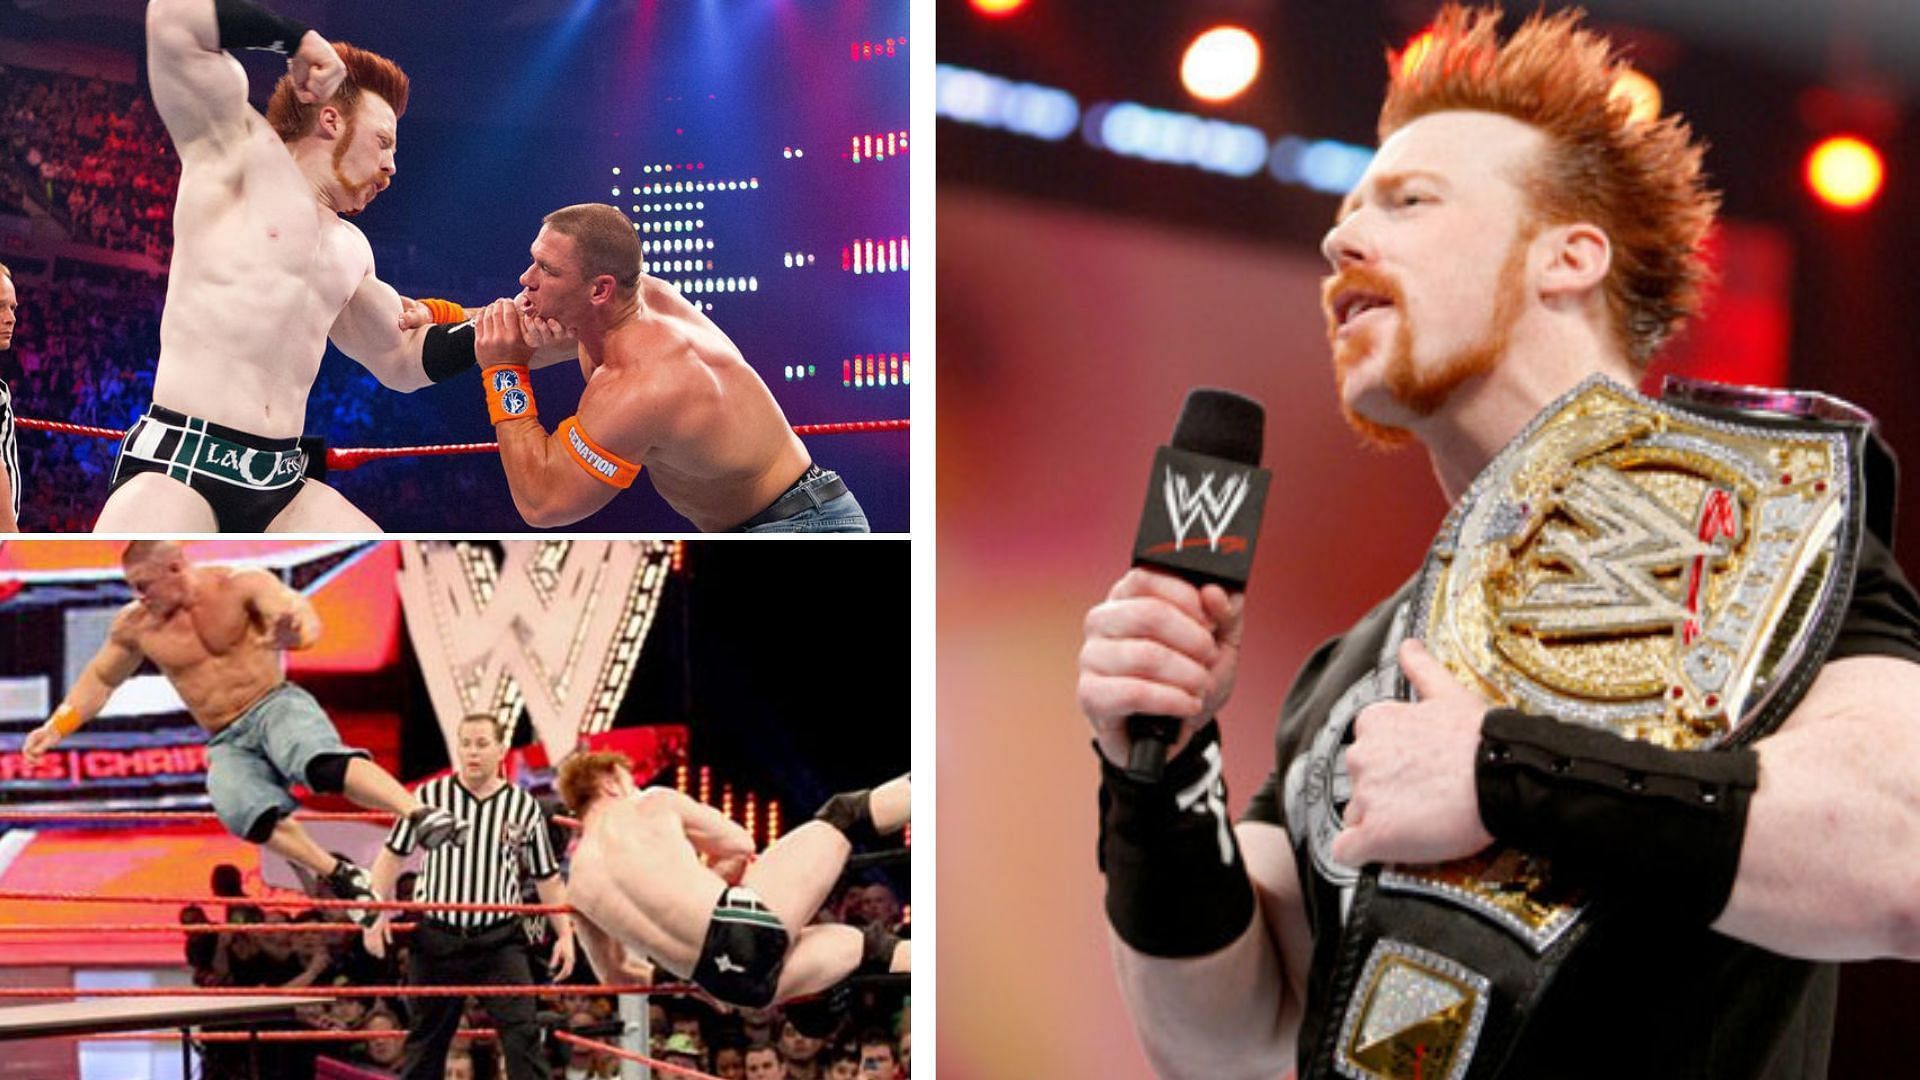 Sheamus won the WWE title twice in his rookie year